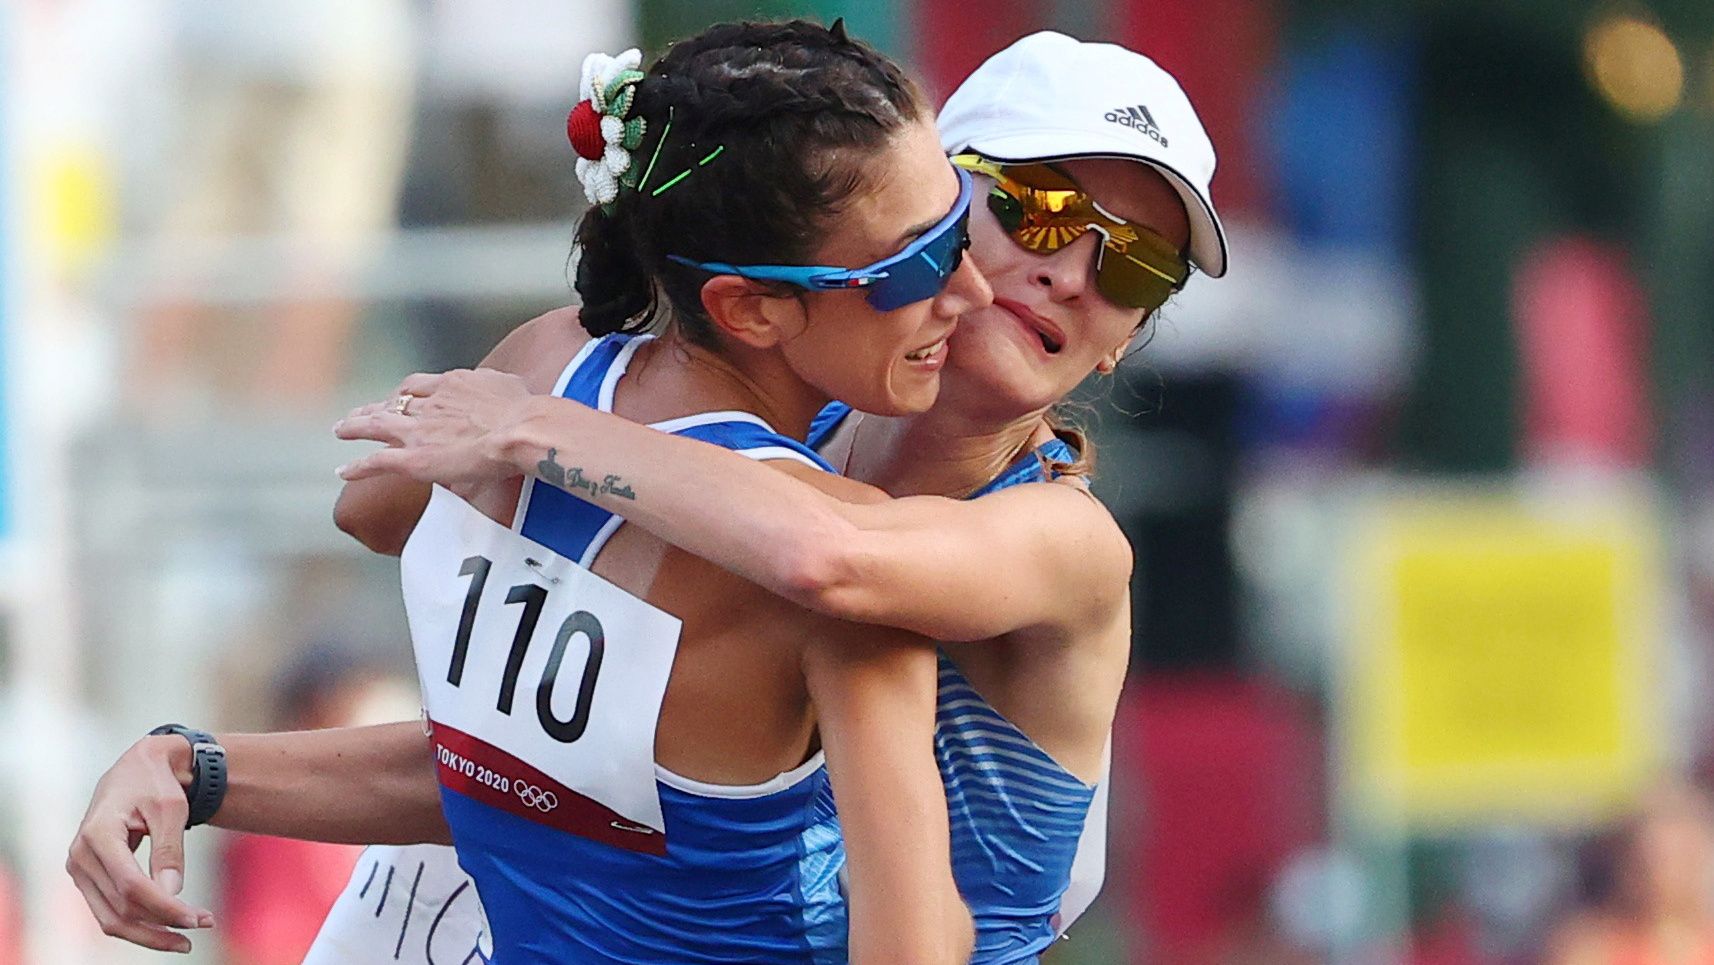 Tokyo 2020 Olympics - Athletics - Women's 20km Walk - Sapporo Odori Park, Sapporo, Japan - August 6, 2021. Gold medallist, Antonella Palmisano of Italy celebrates with silver medallist, Sandra Arenas of Colombia after the race REUTERS/Feline Lim